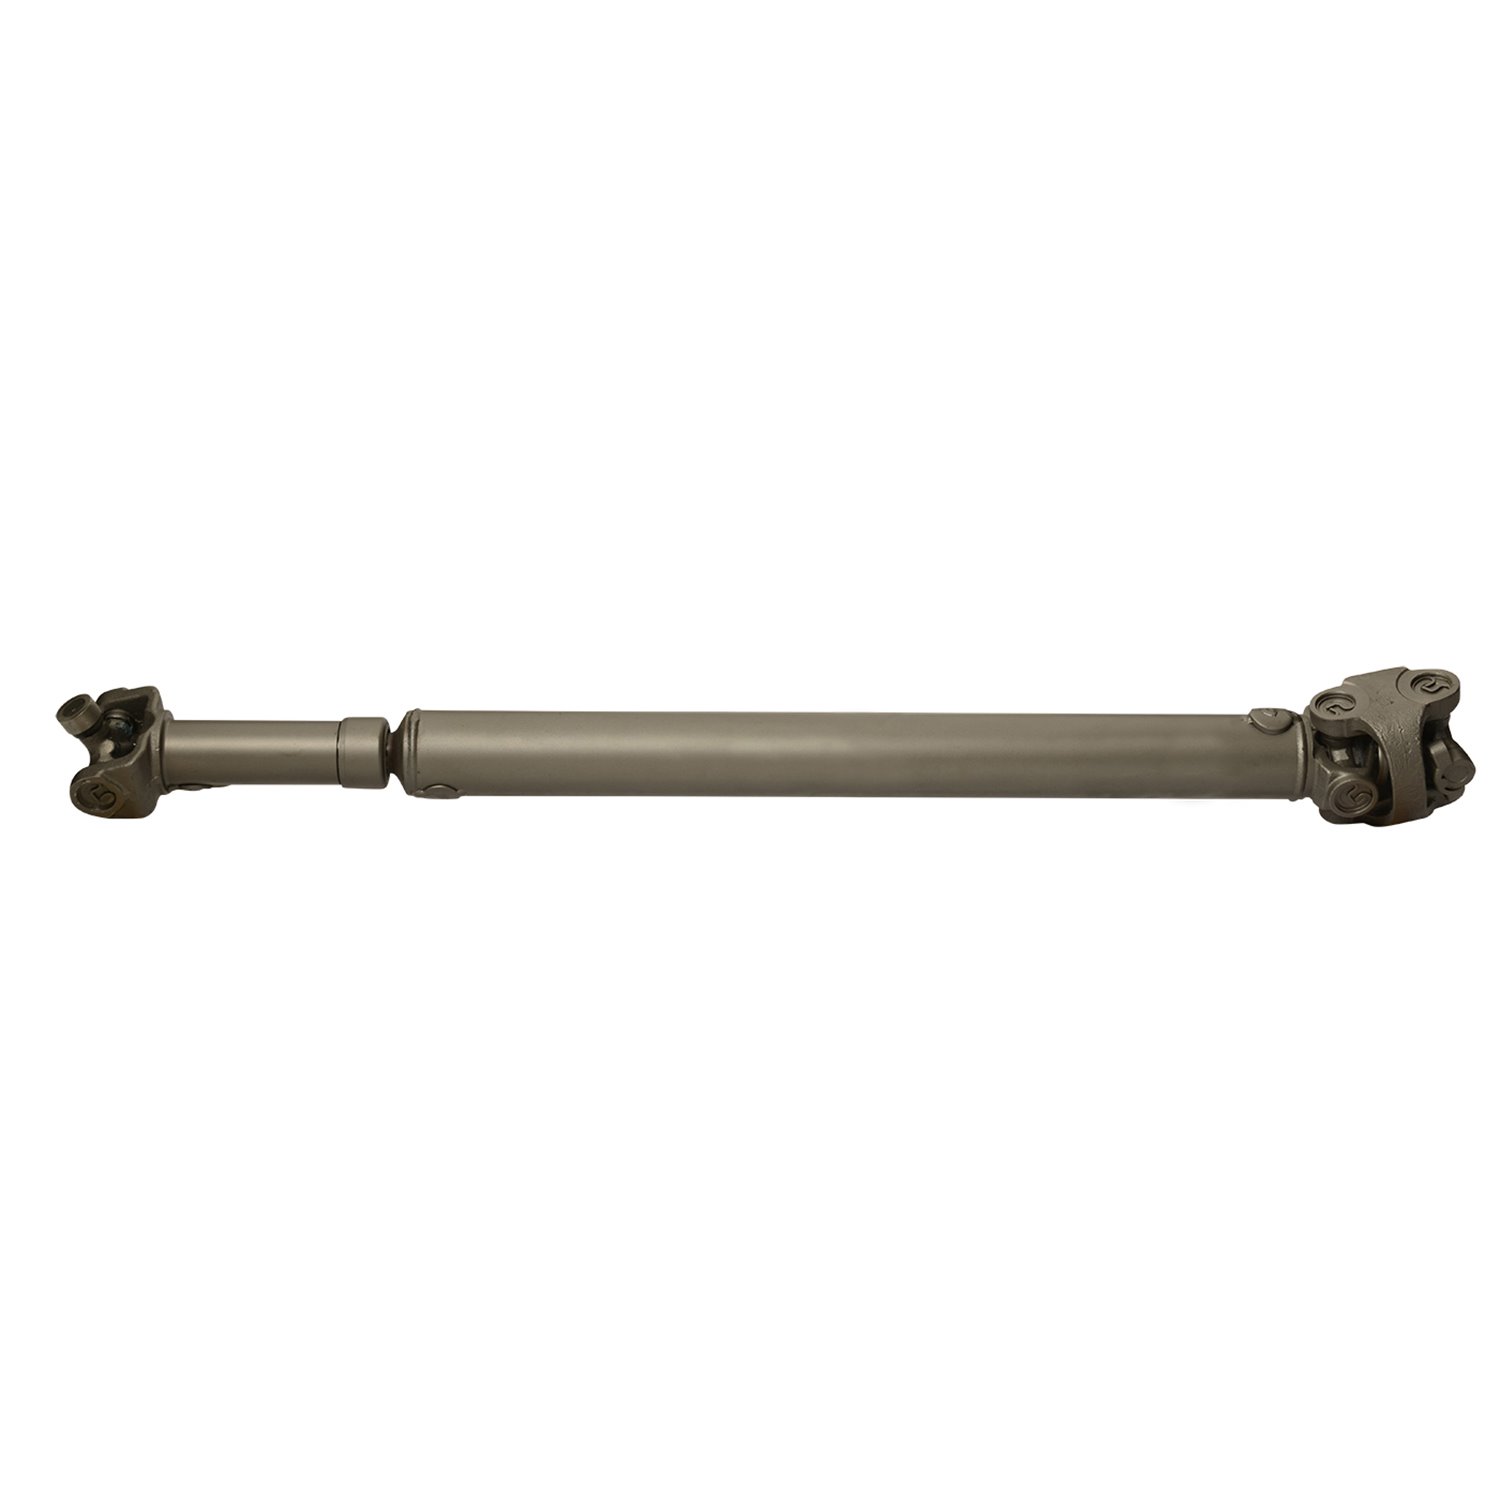 USA Standard ZDS9416 Rear Driveshaft, For Bronco, 28-5/8 in. Center-To-Center